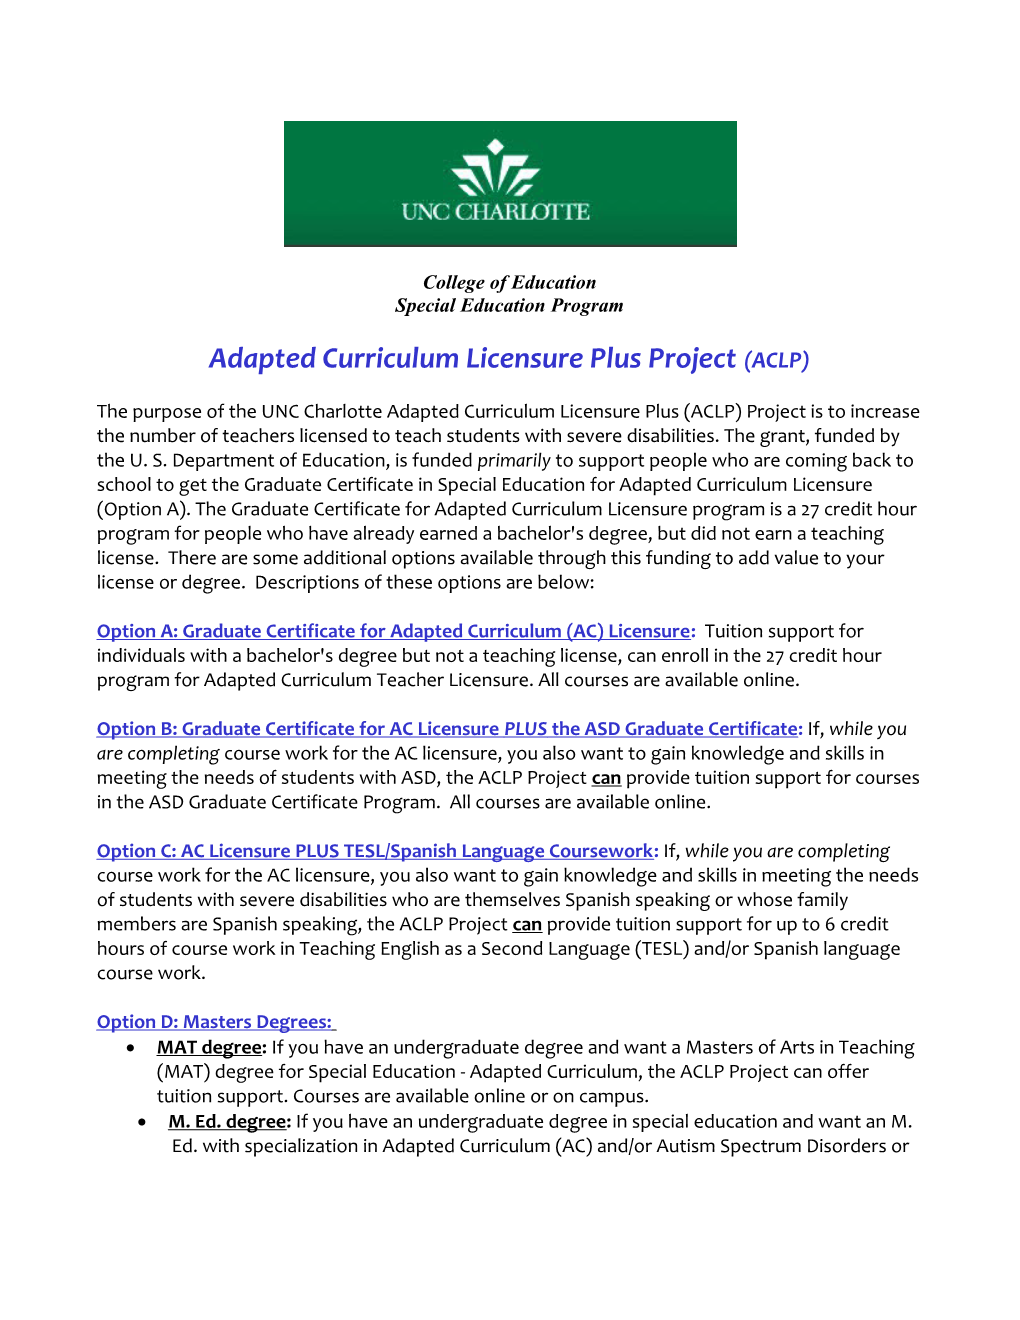 Adapted Curriculum Licensure Plus Project (ACLP)